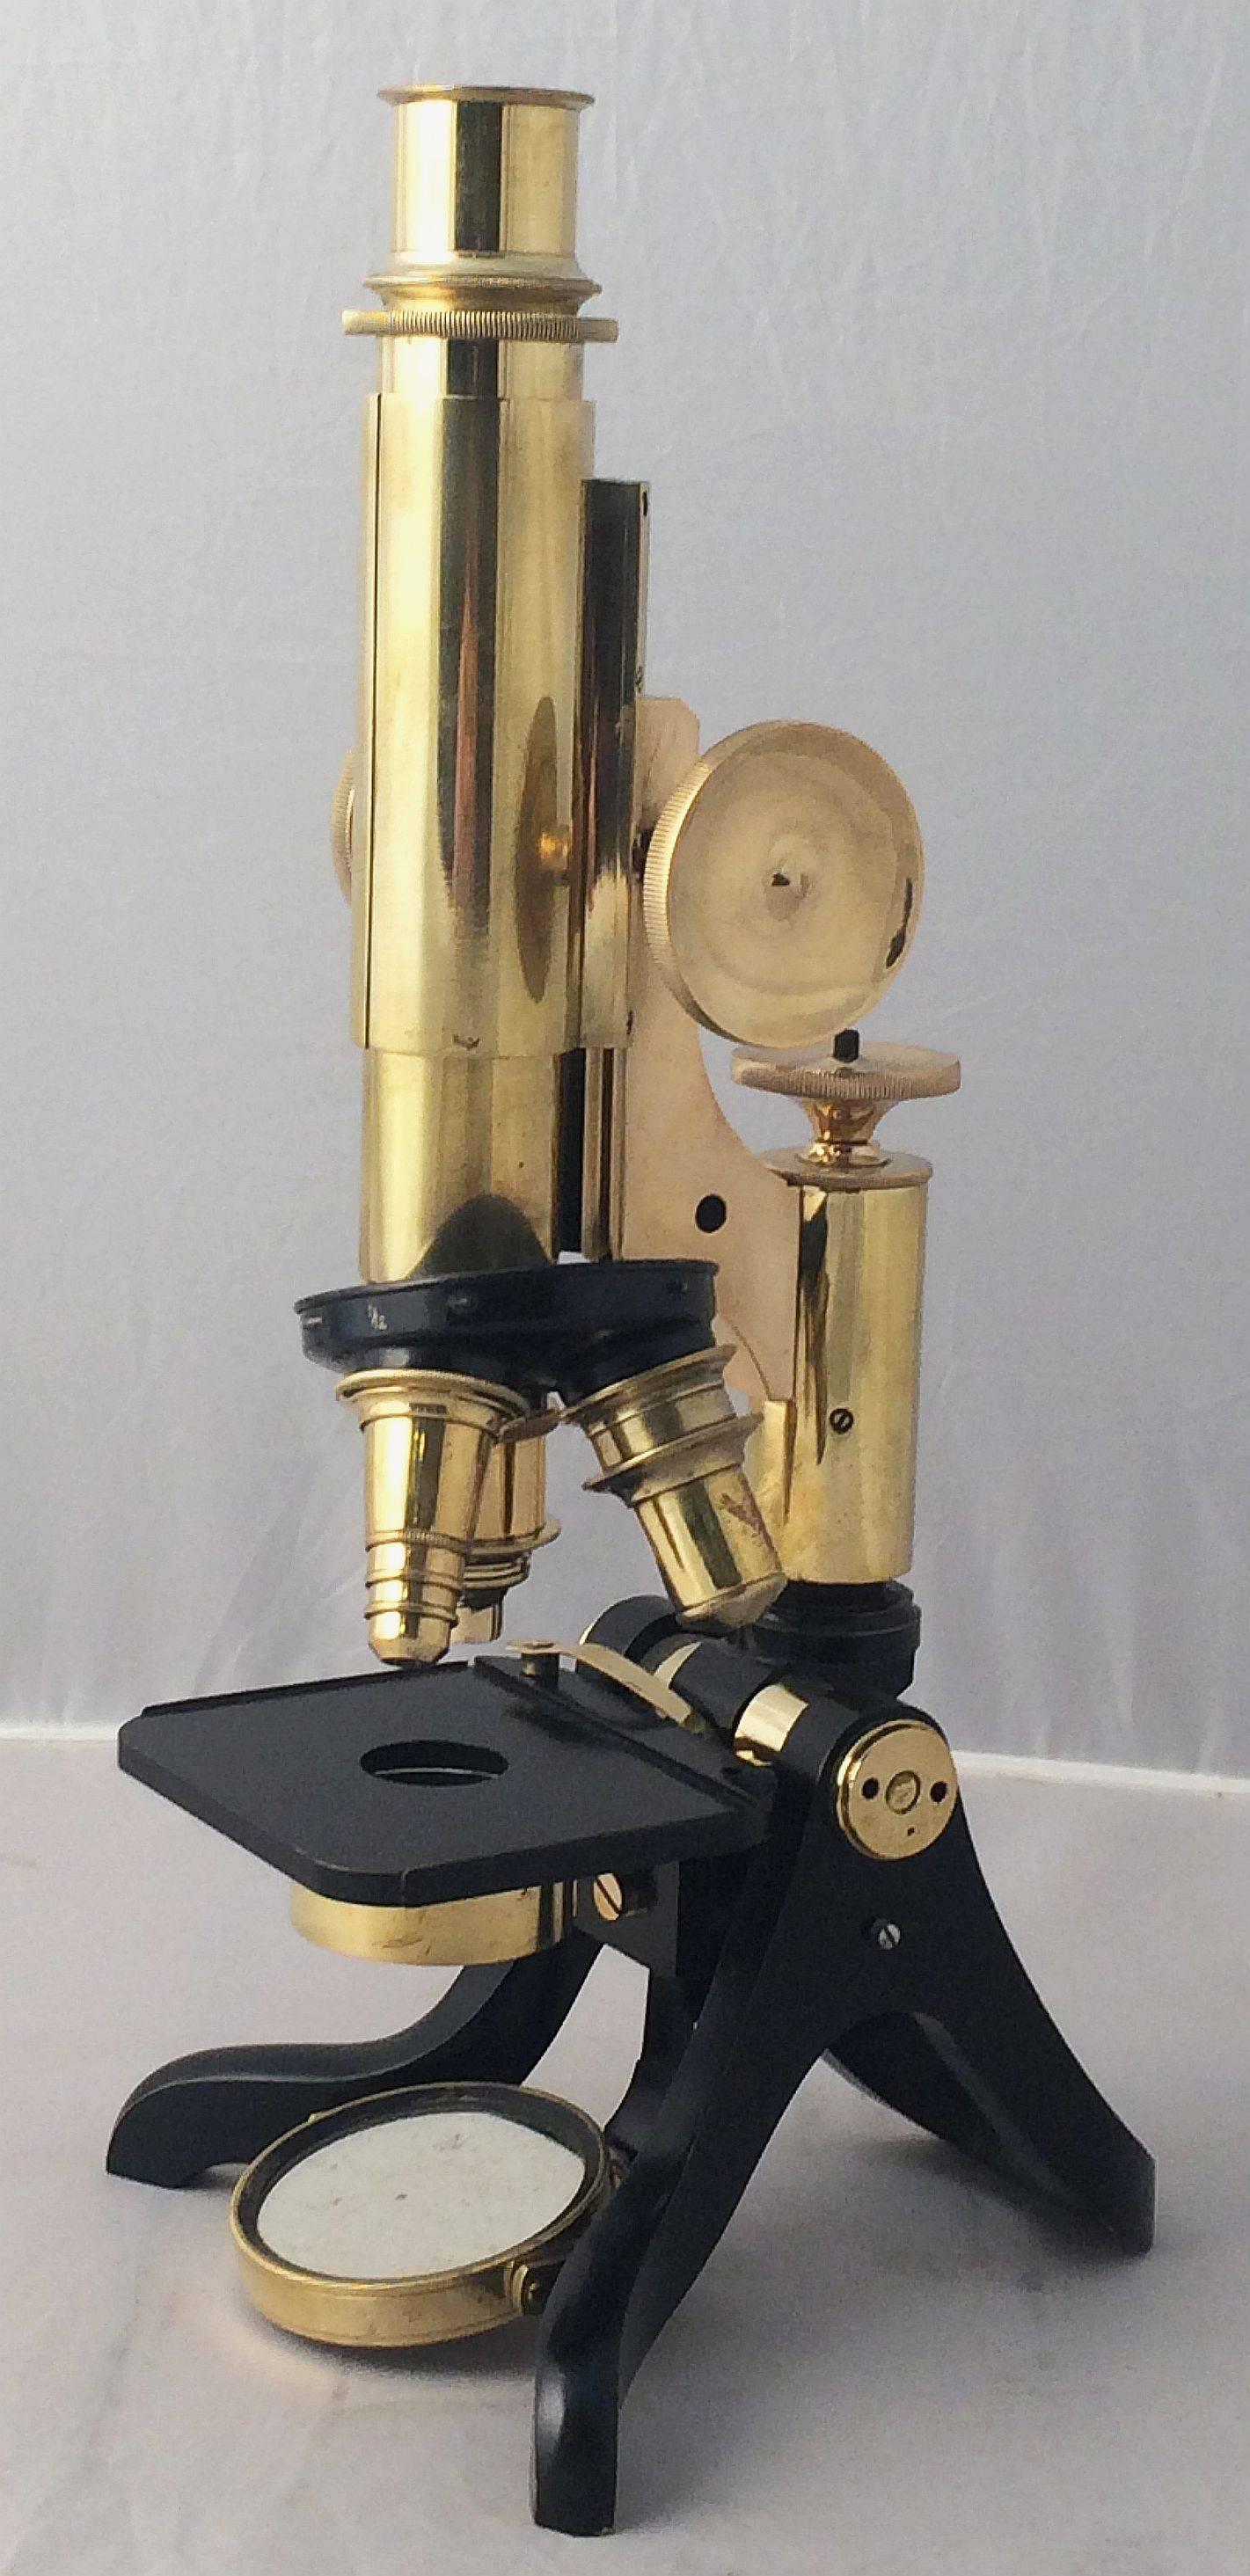 A fine working English compound microscope by Henry Crouch of London, circa 1880

Marked No. 4016 on base.

With fitted box of mahogany with brass hardware and key.

Diamond-shaped brass escutcheon reads: W.R. Prior, Eagle St, London

With removable